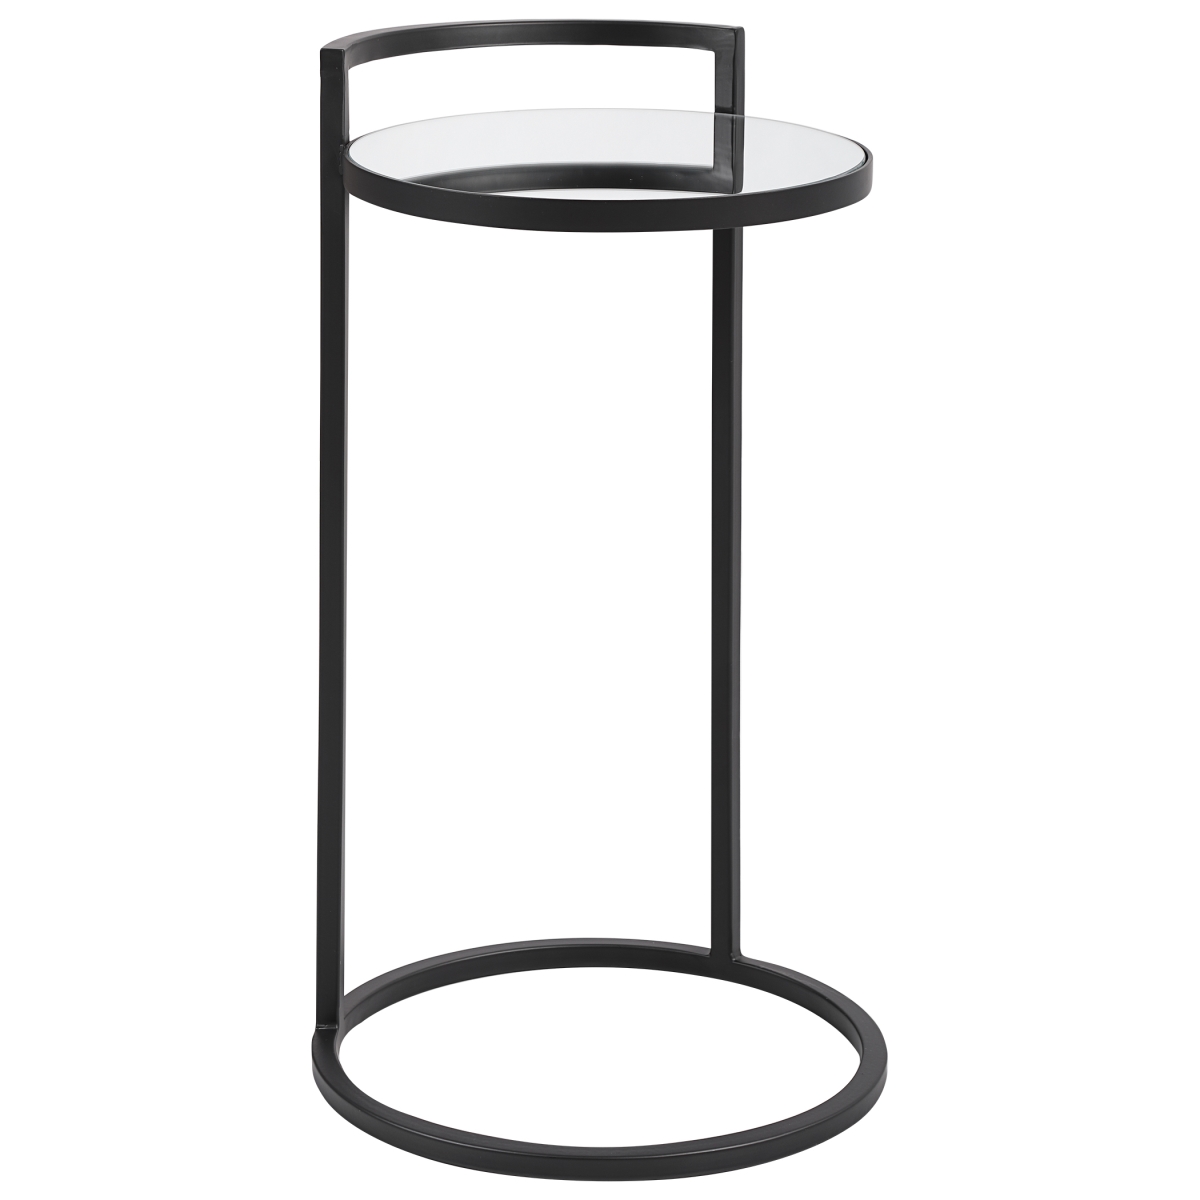 UPC 792977000021 product image for W23001 14 x 26 x 14 in. Iron Accent Table | upcitemdb.com